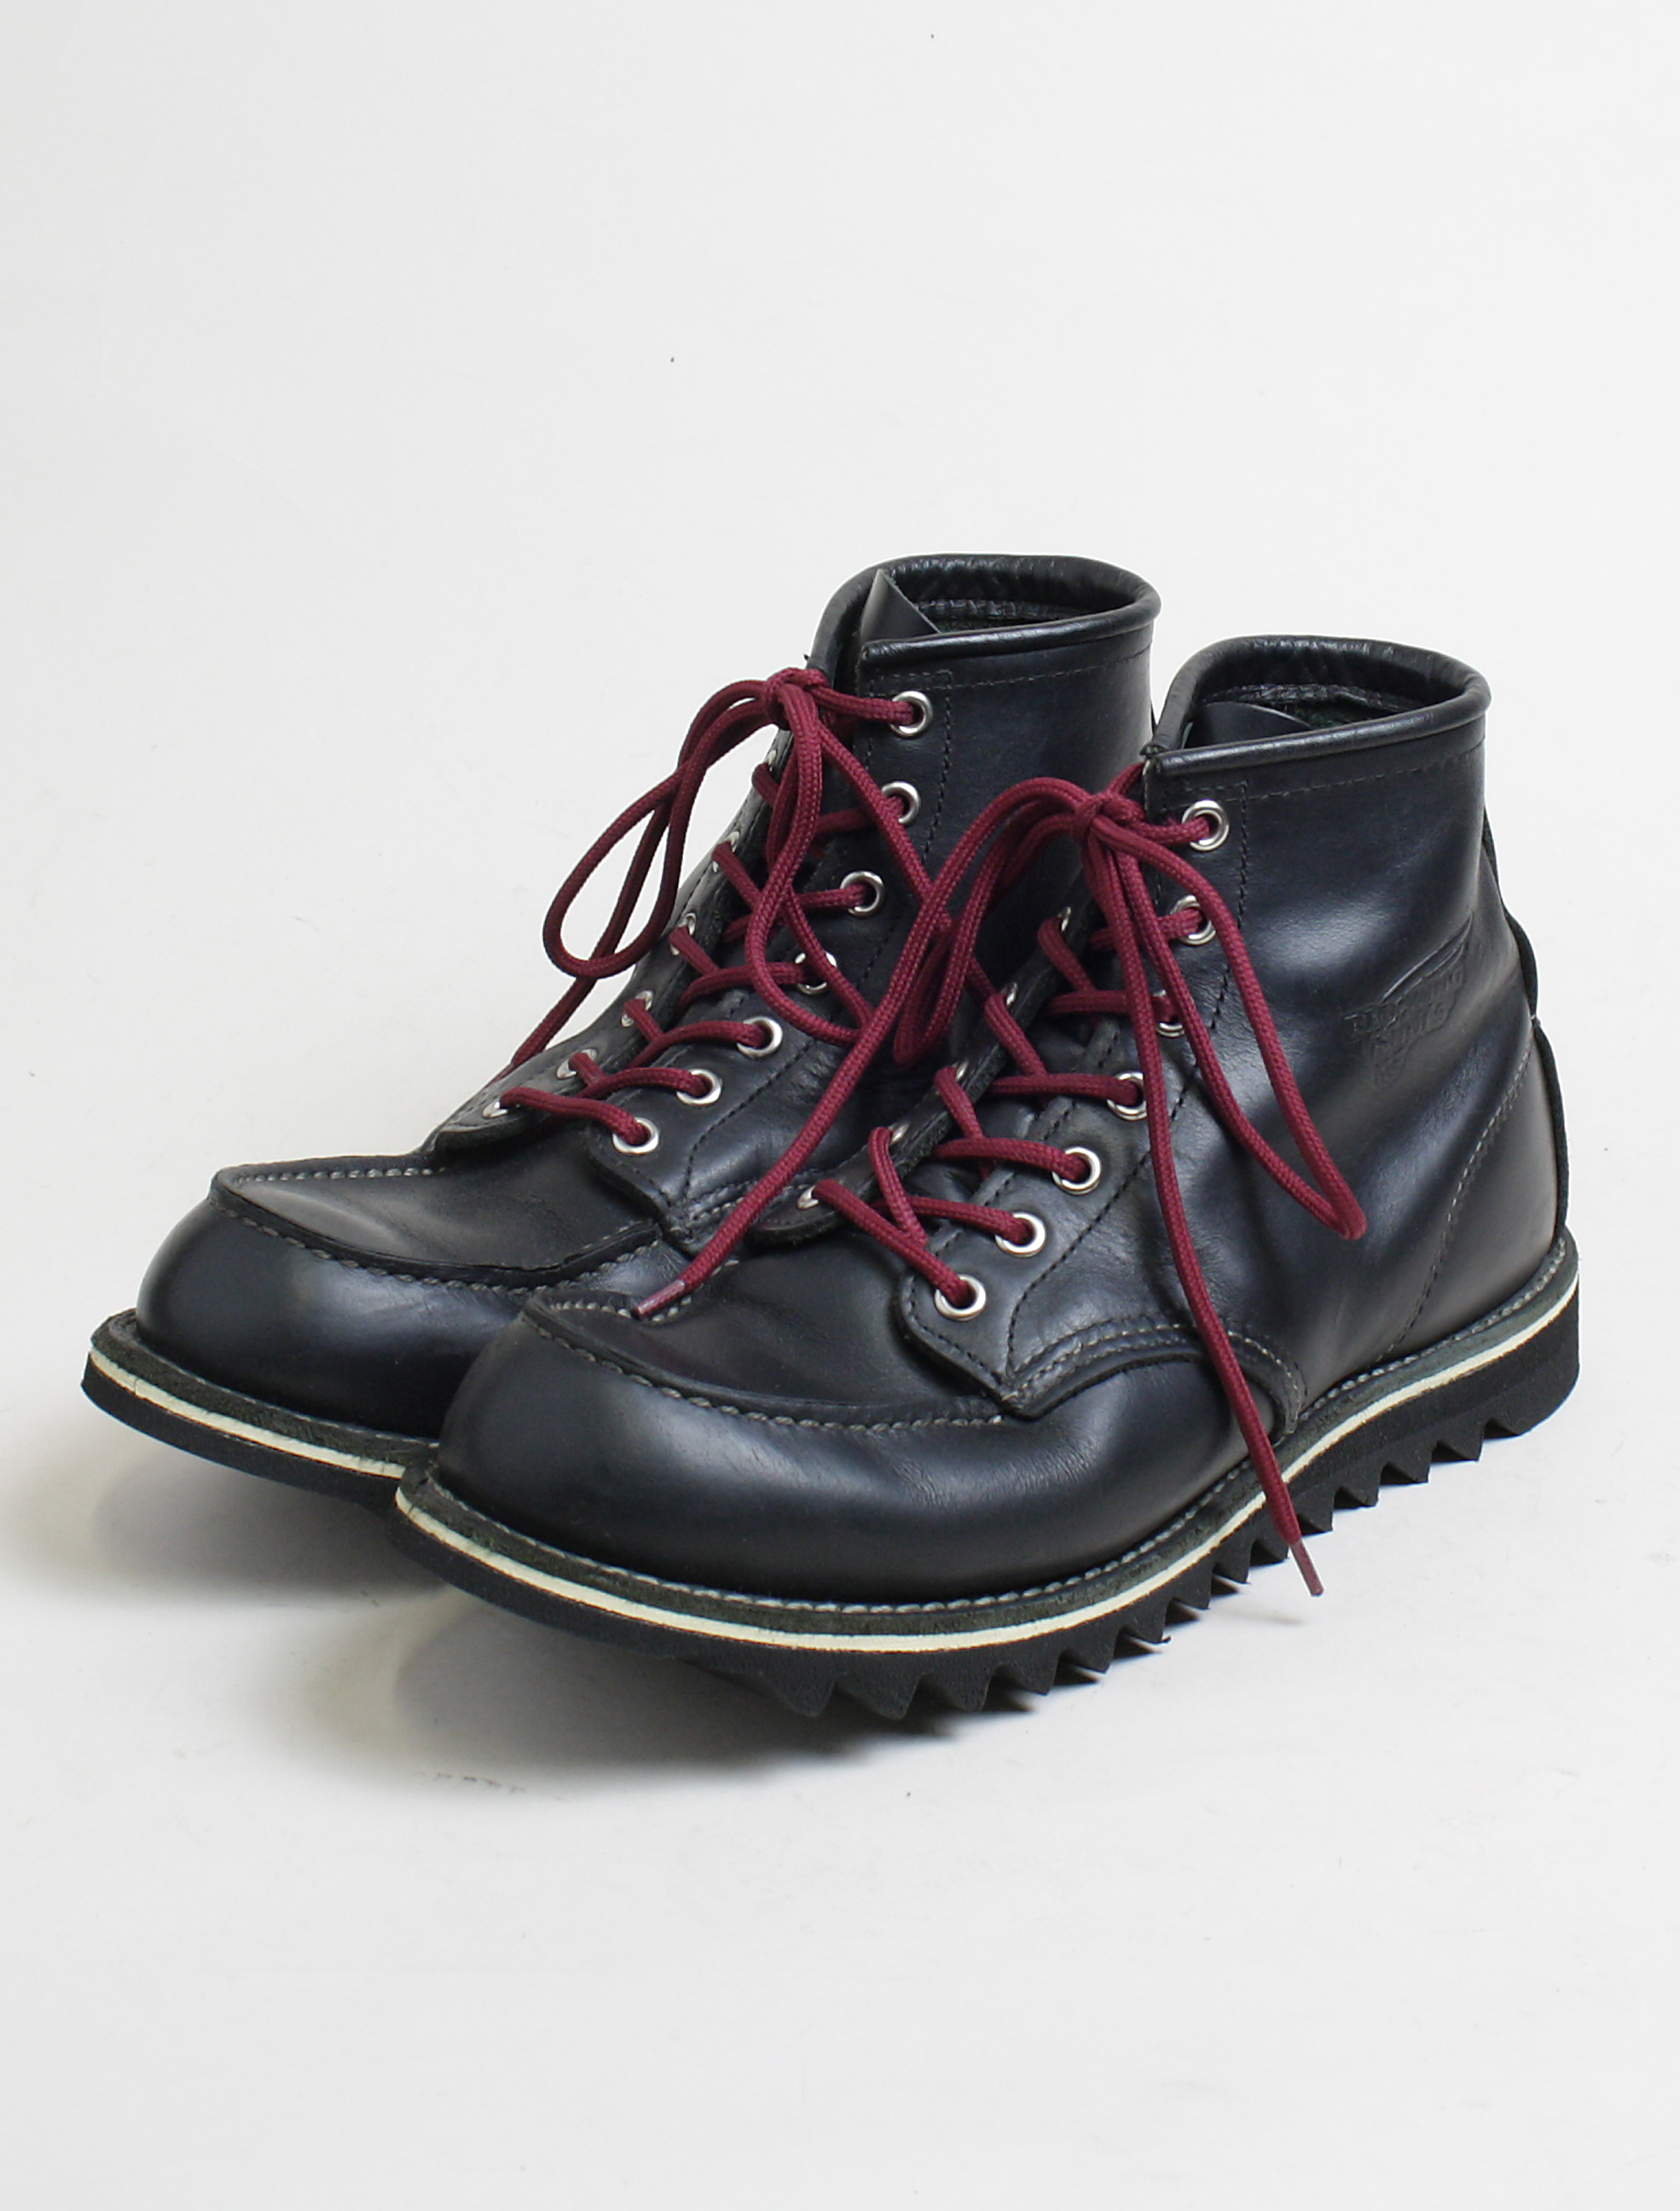 Repair – Redwing resoled with Vibram® Ripple sole